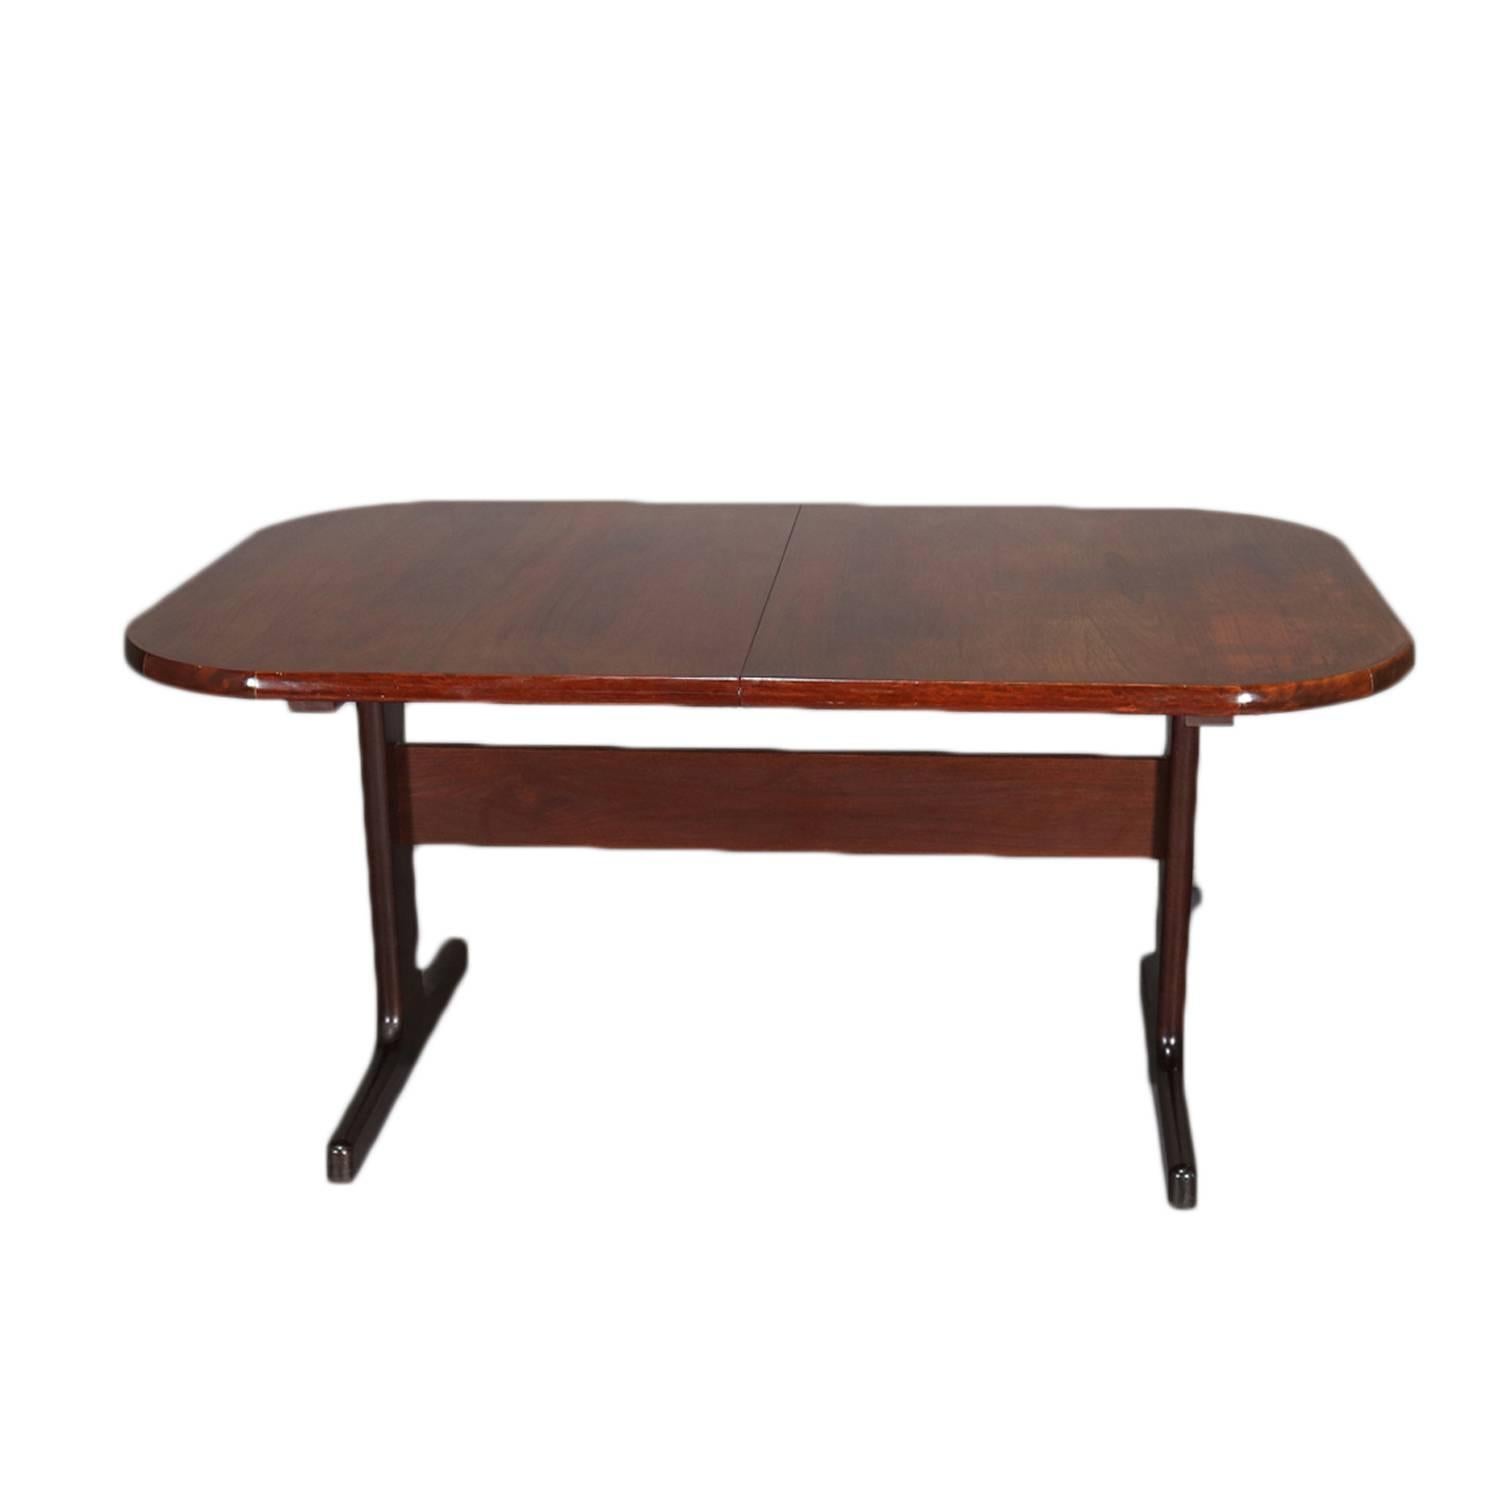 Carved Midcentury Danish Modern Sculpted Rosewood Dining Table & Six Chairs, circa 1960